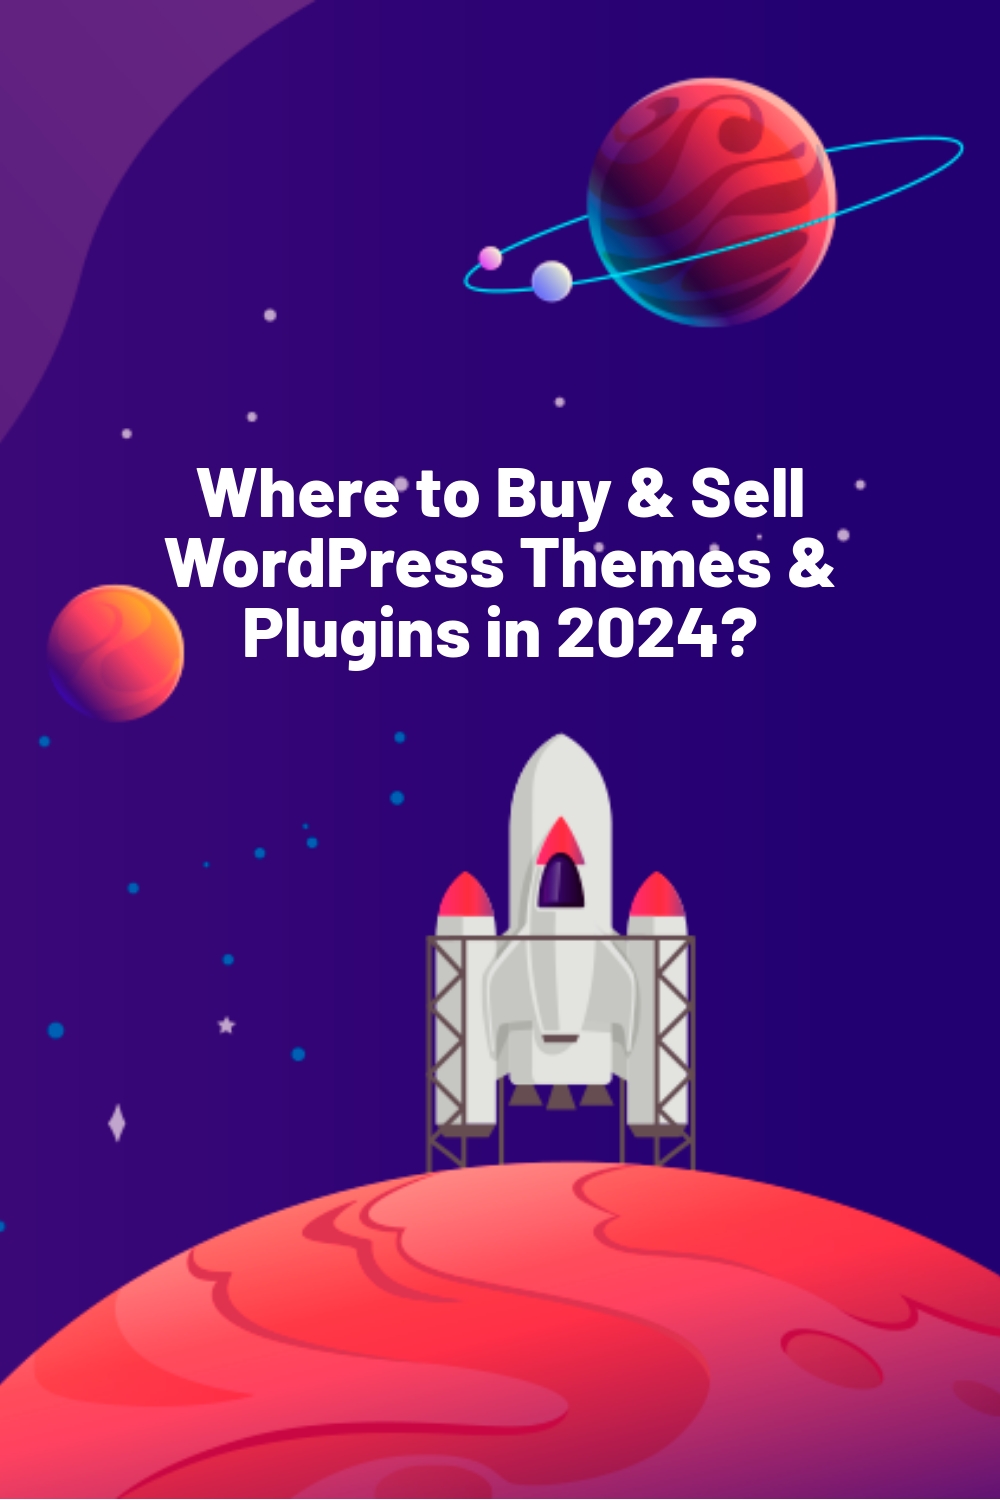 Where to Buy & Sell WordPress Themes & Plugins in 2024?